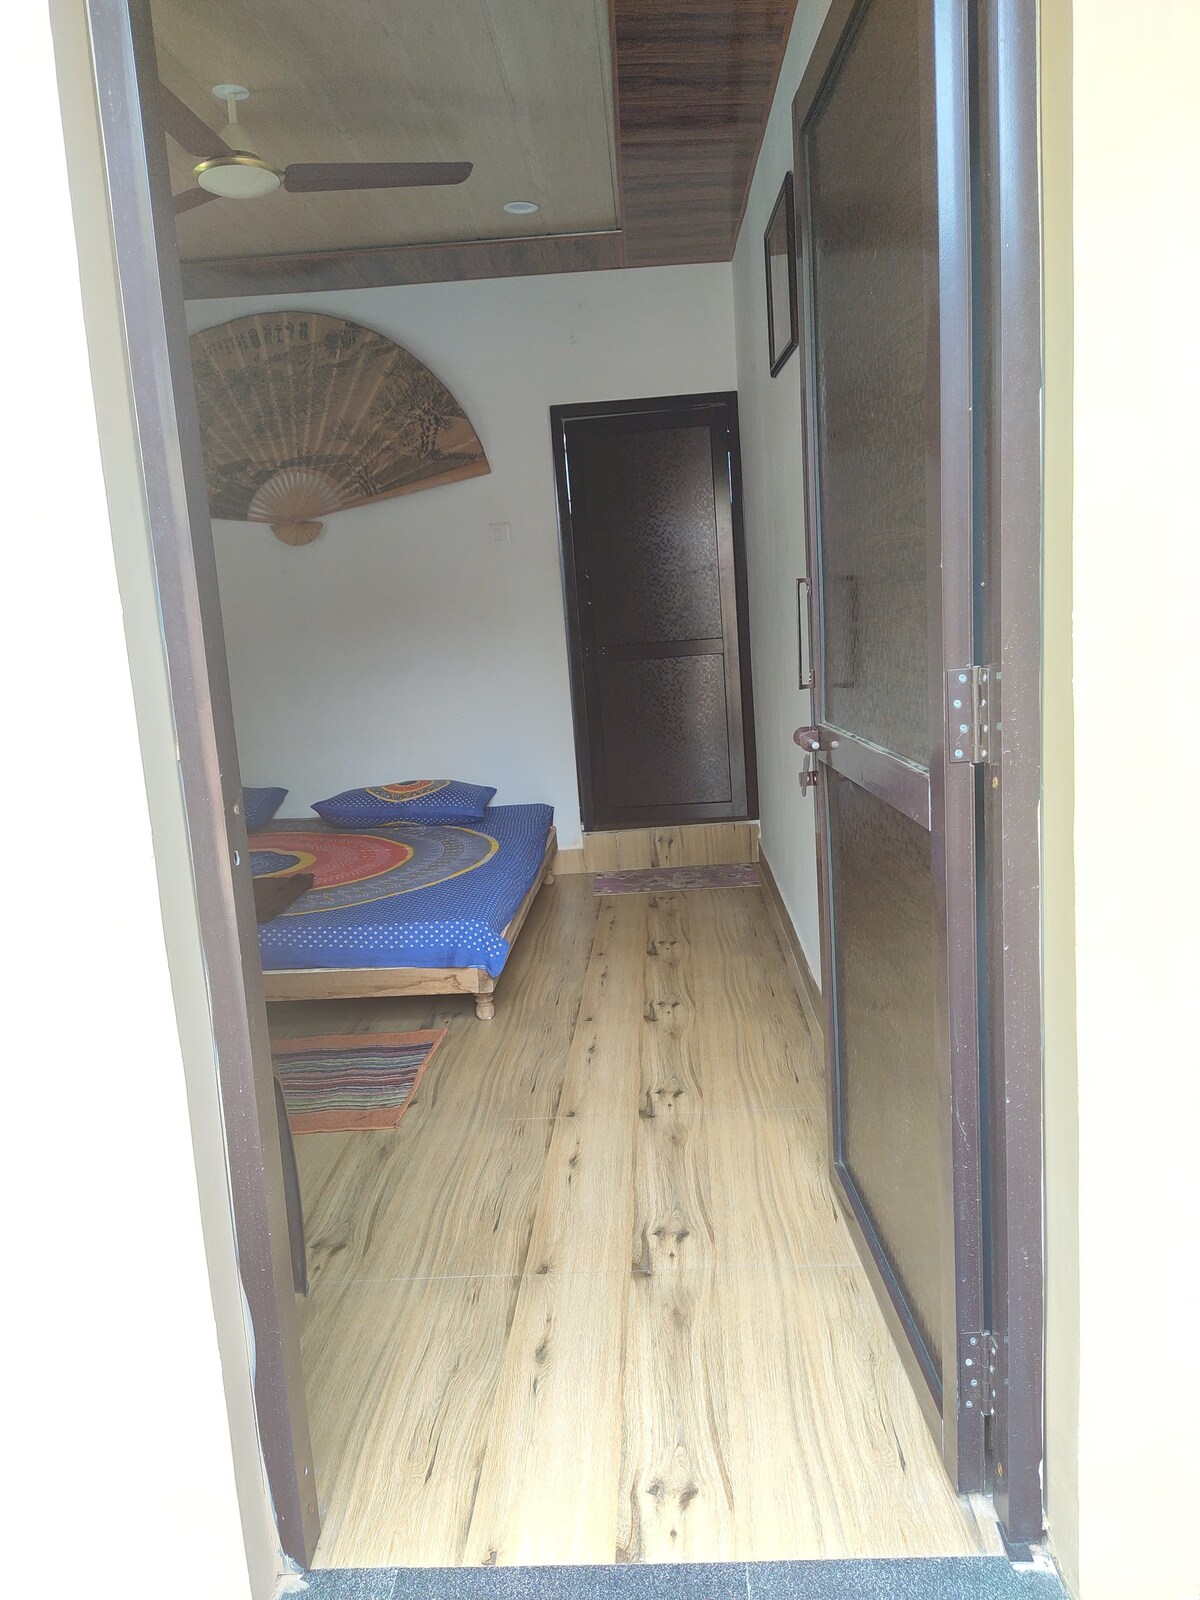 Earthy abode in the Himalayas - Homestay#5 @etuadv